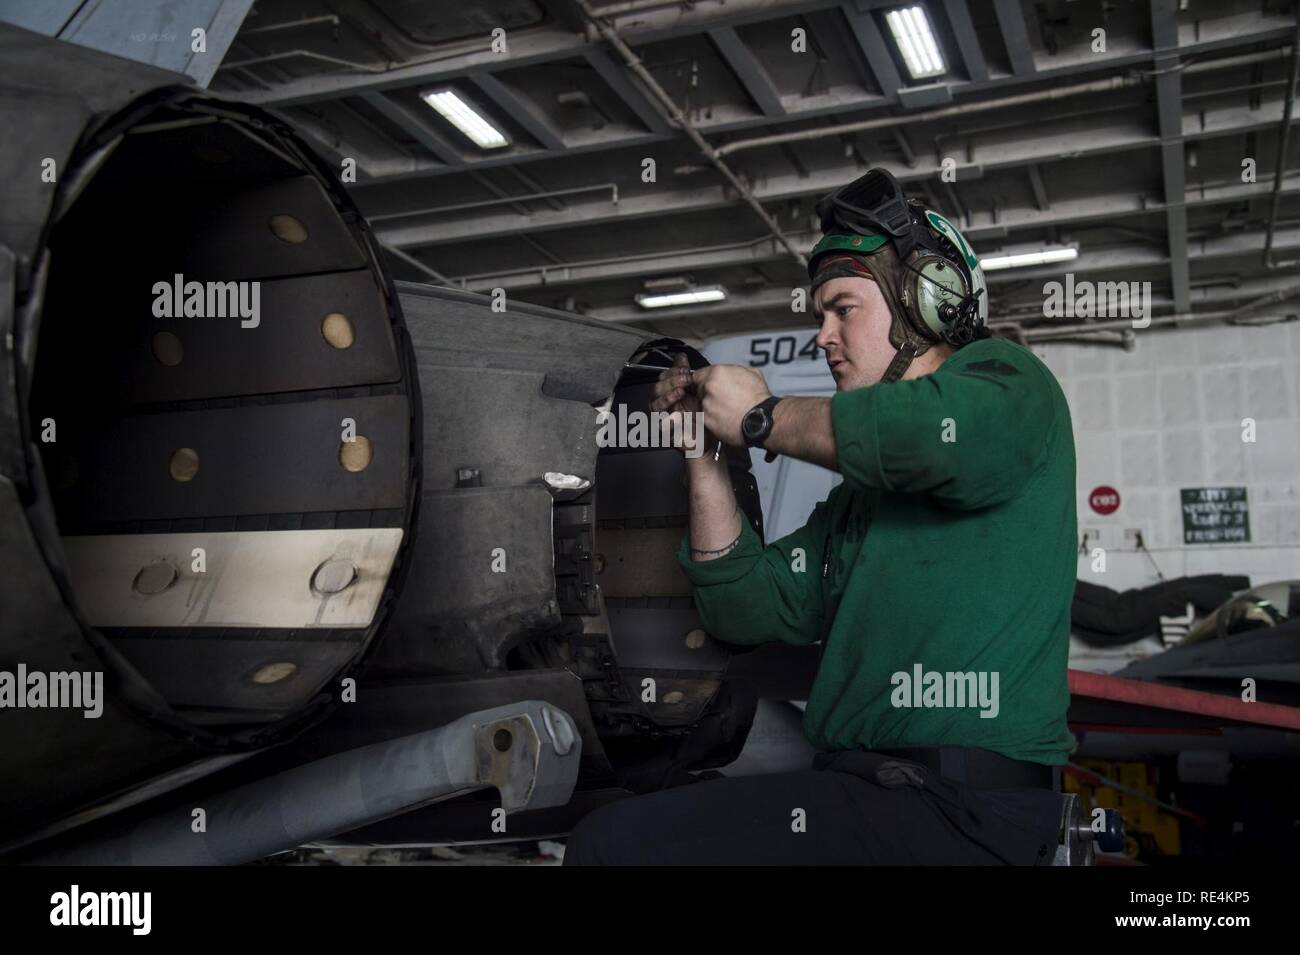 ARABIAN GULF (Nov. 25, 2016) Petty Officer 3rd Class Jacob Wiggs, from Roswell, N.M. inspects the variable exhaust nozzle for a 200-hour flight engine inspection in the hangar bay of the aircraft carrier USS Dwight D. Eisenhower (CVN 69) (Ike). Ike and its Carrier Strike Group are deployed in support of Operation Inherent Resolve, maritime security operations and theater security cooperation efforts in the U.S. 5th Fleet area of operations. Stock Photo